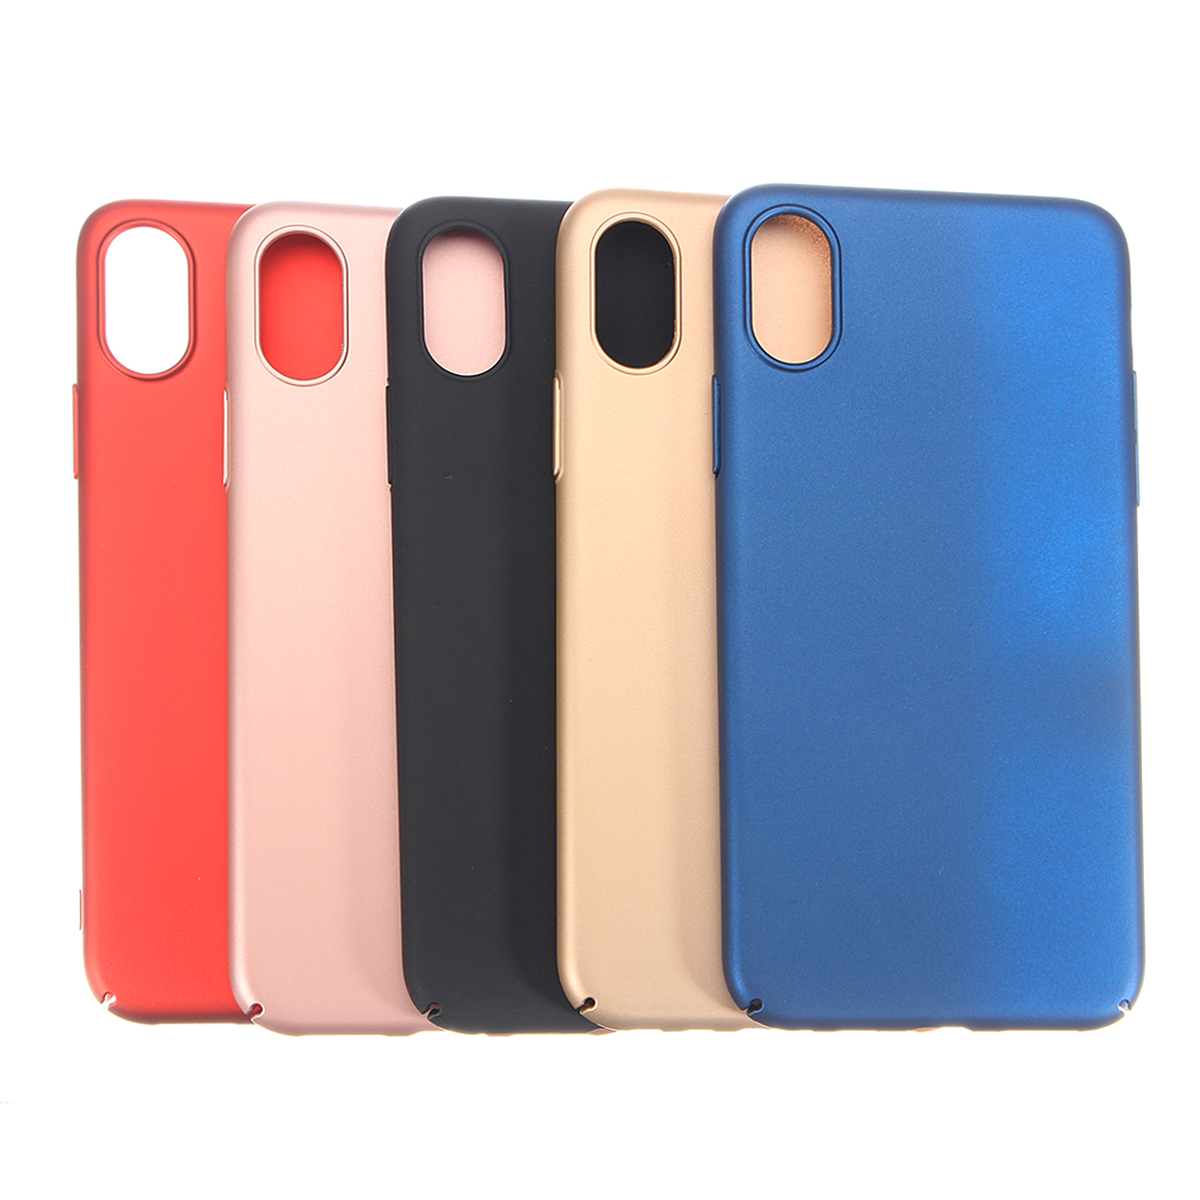 Multi-color-Ultra-Thin-Anti-skidding-Hard-PC-Back-Case-for-iPhone-X-1230526-4